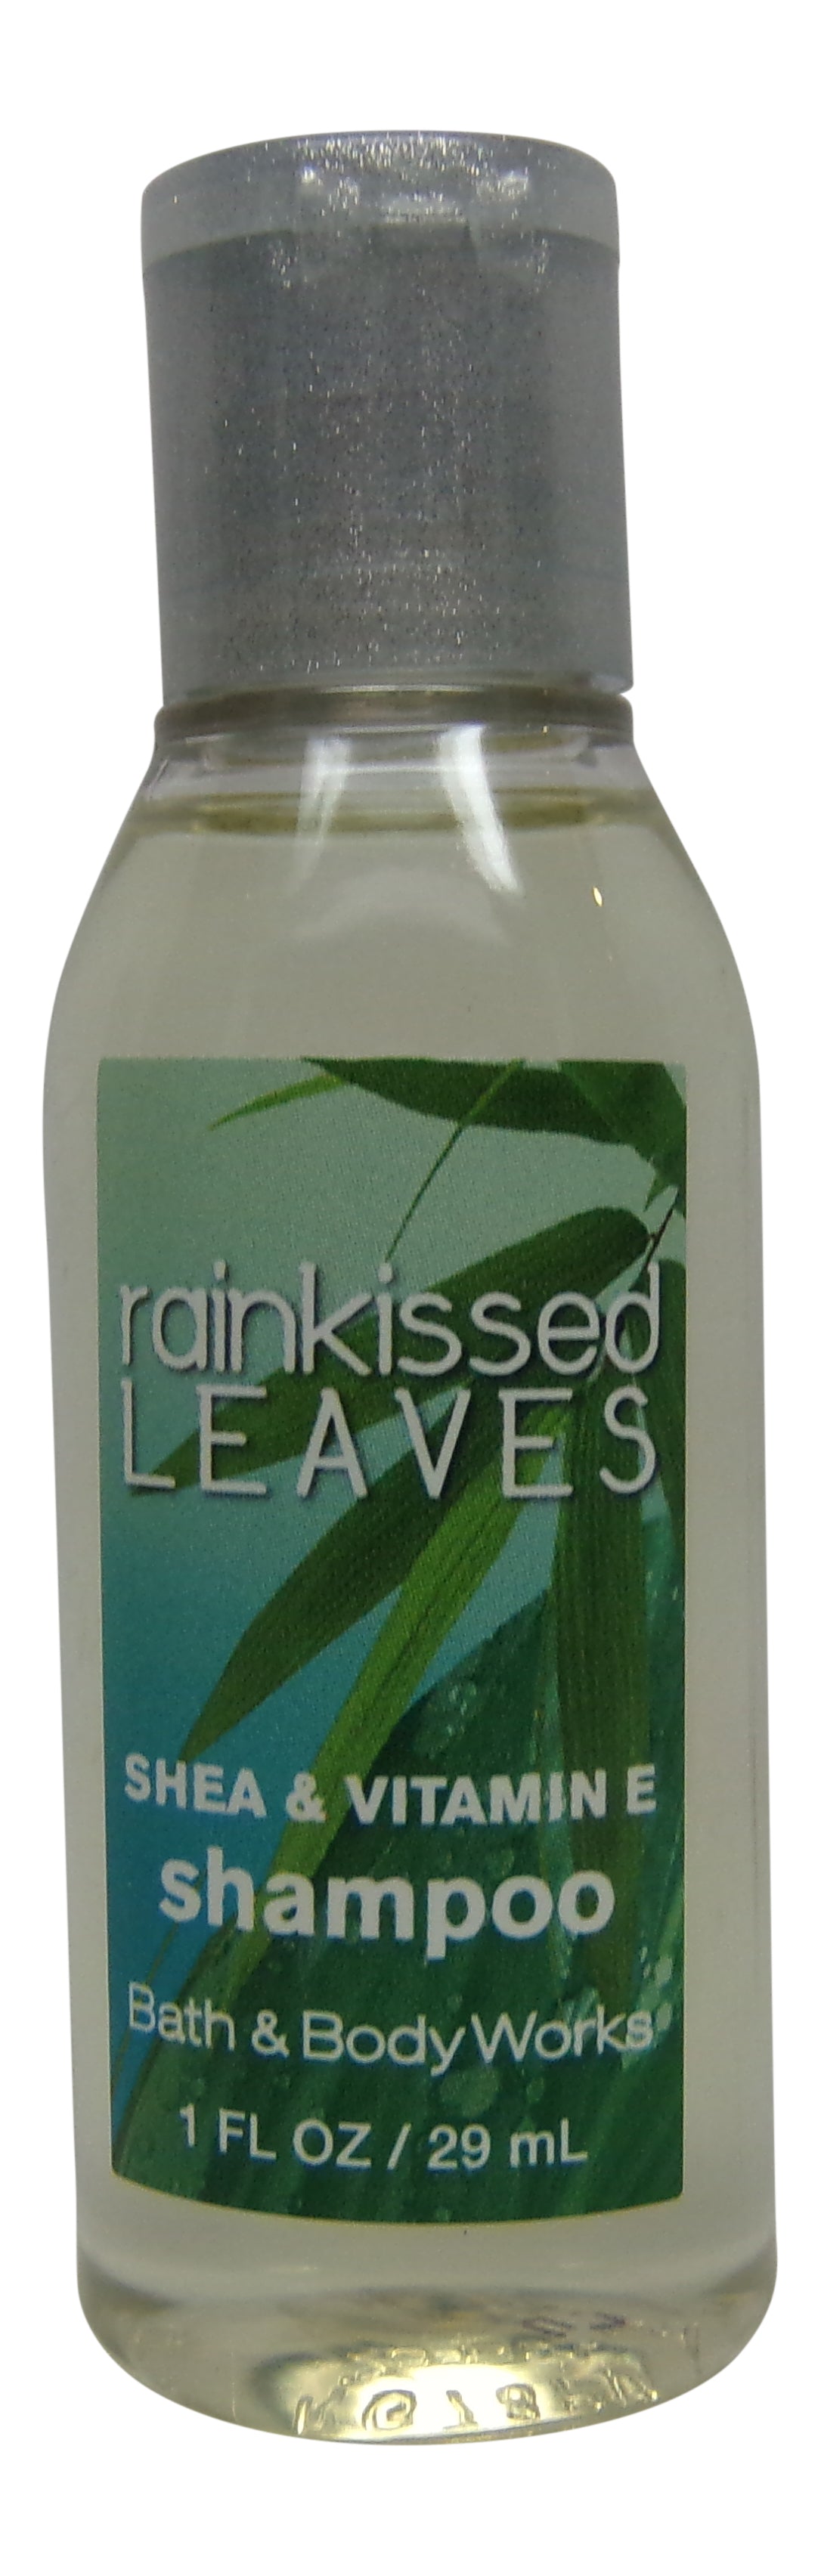 Bath & Body Works Rainkissed Leaves Shampoo and Conditioner. Lot of 18 Bottles (9 of each).